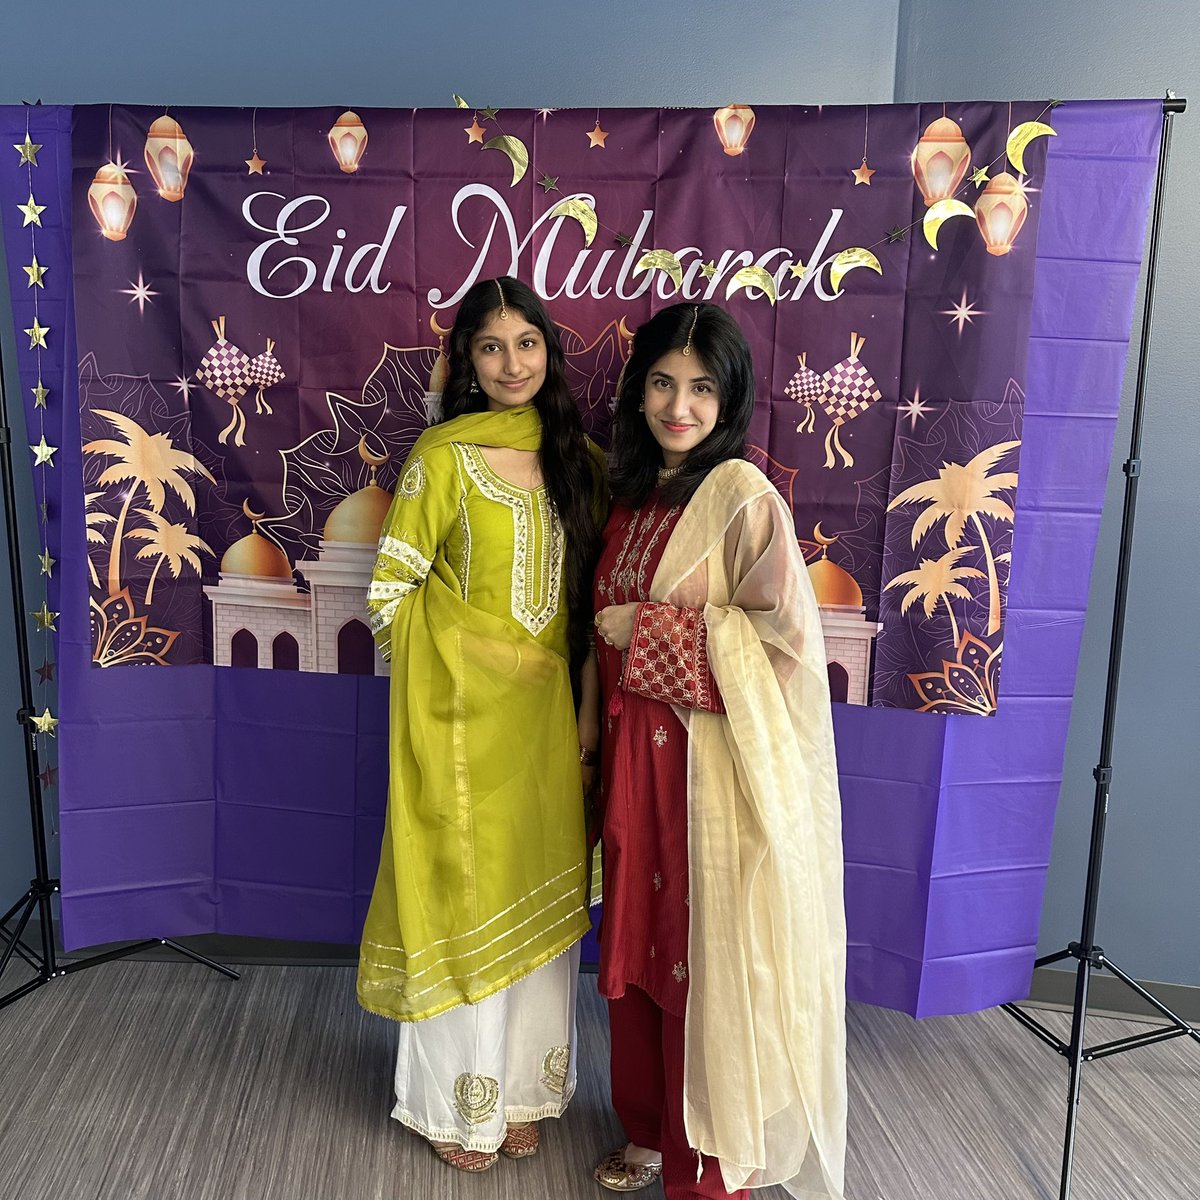 🌙Happy Eid Mubarak! Thank you to @Global_Cambrian for hosting today’s Eid al-Fitr Celebration, where the Cambrian community came together to mark the end of Ramadan with joy, laughter, unity and delicious food! 🌙 #CambrianCollege #Eid_Mubarak